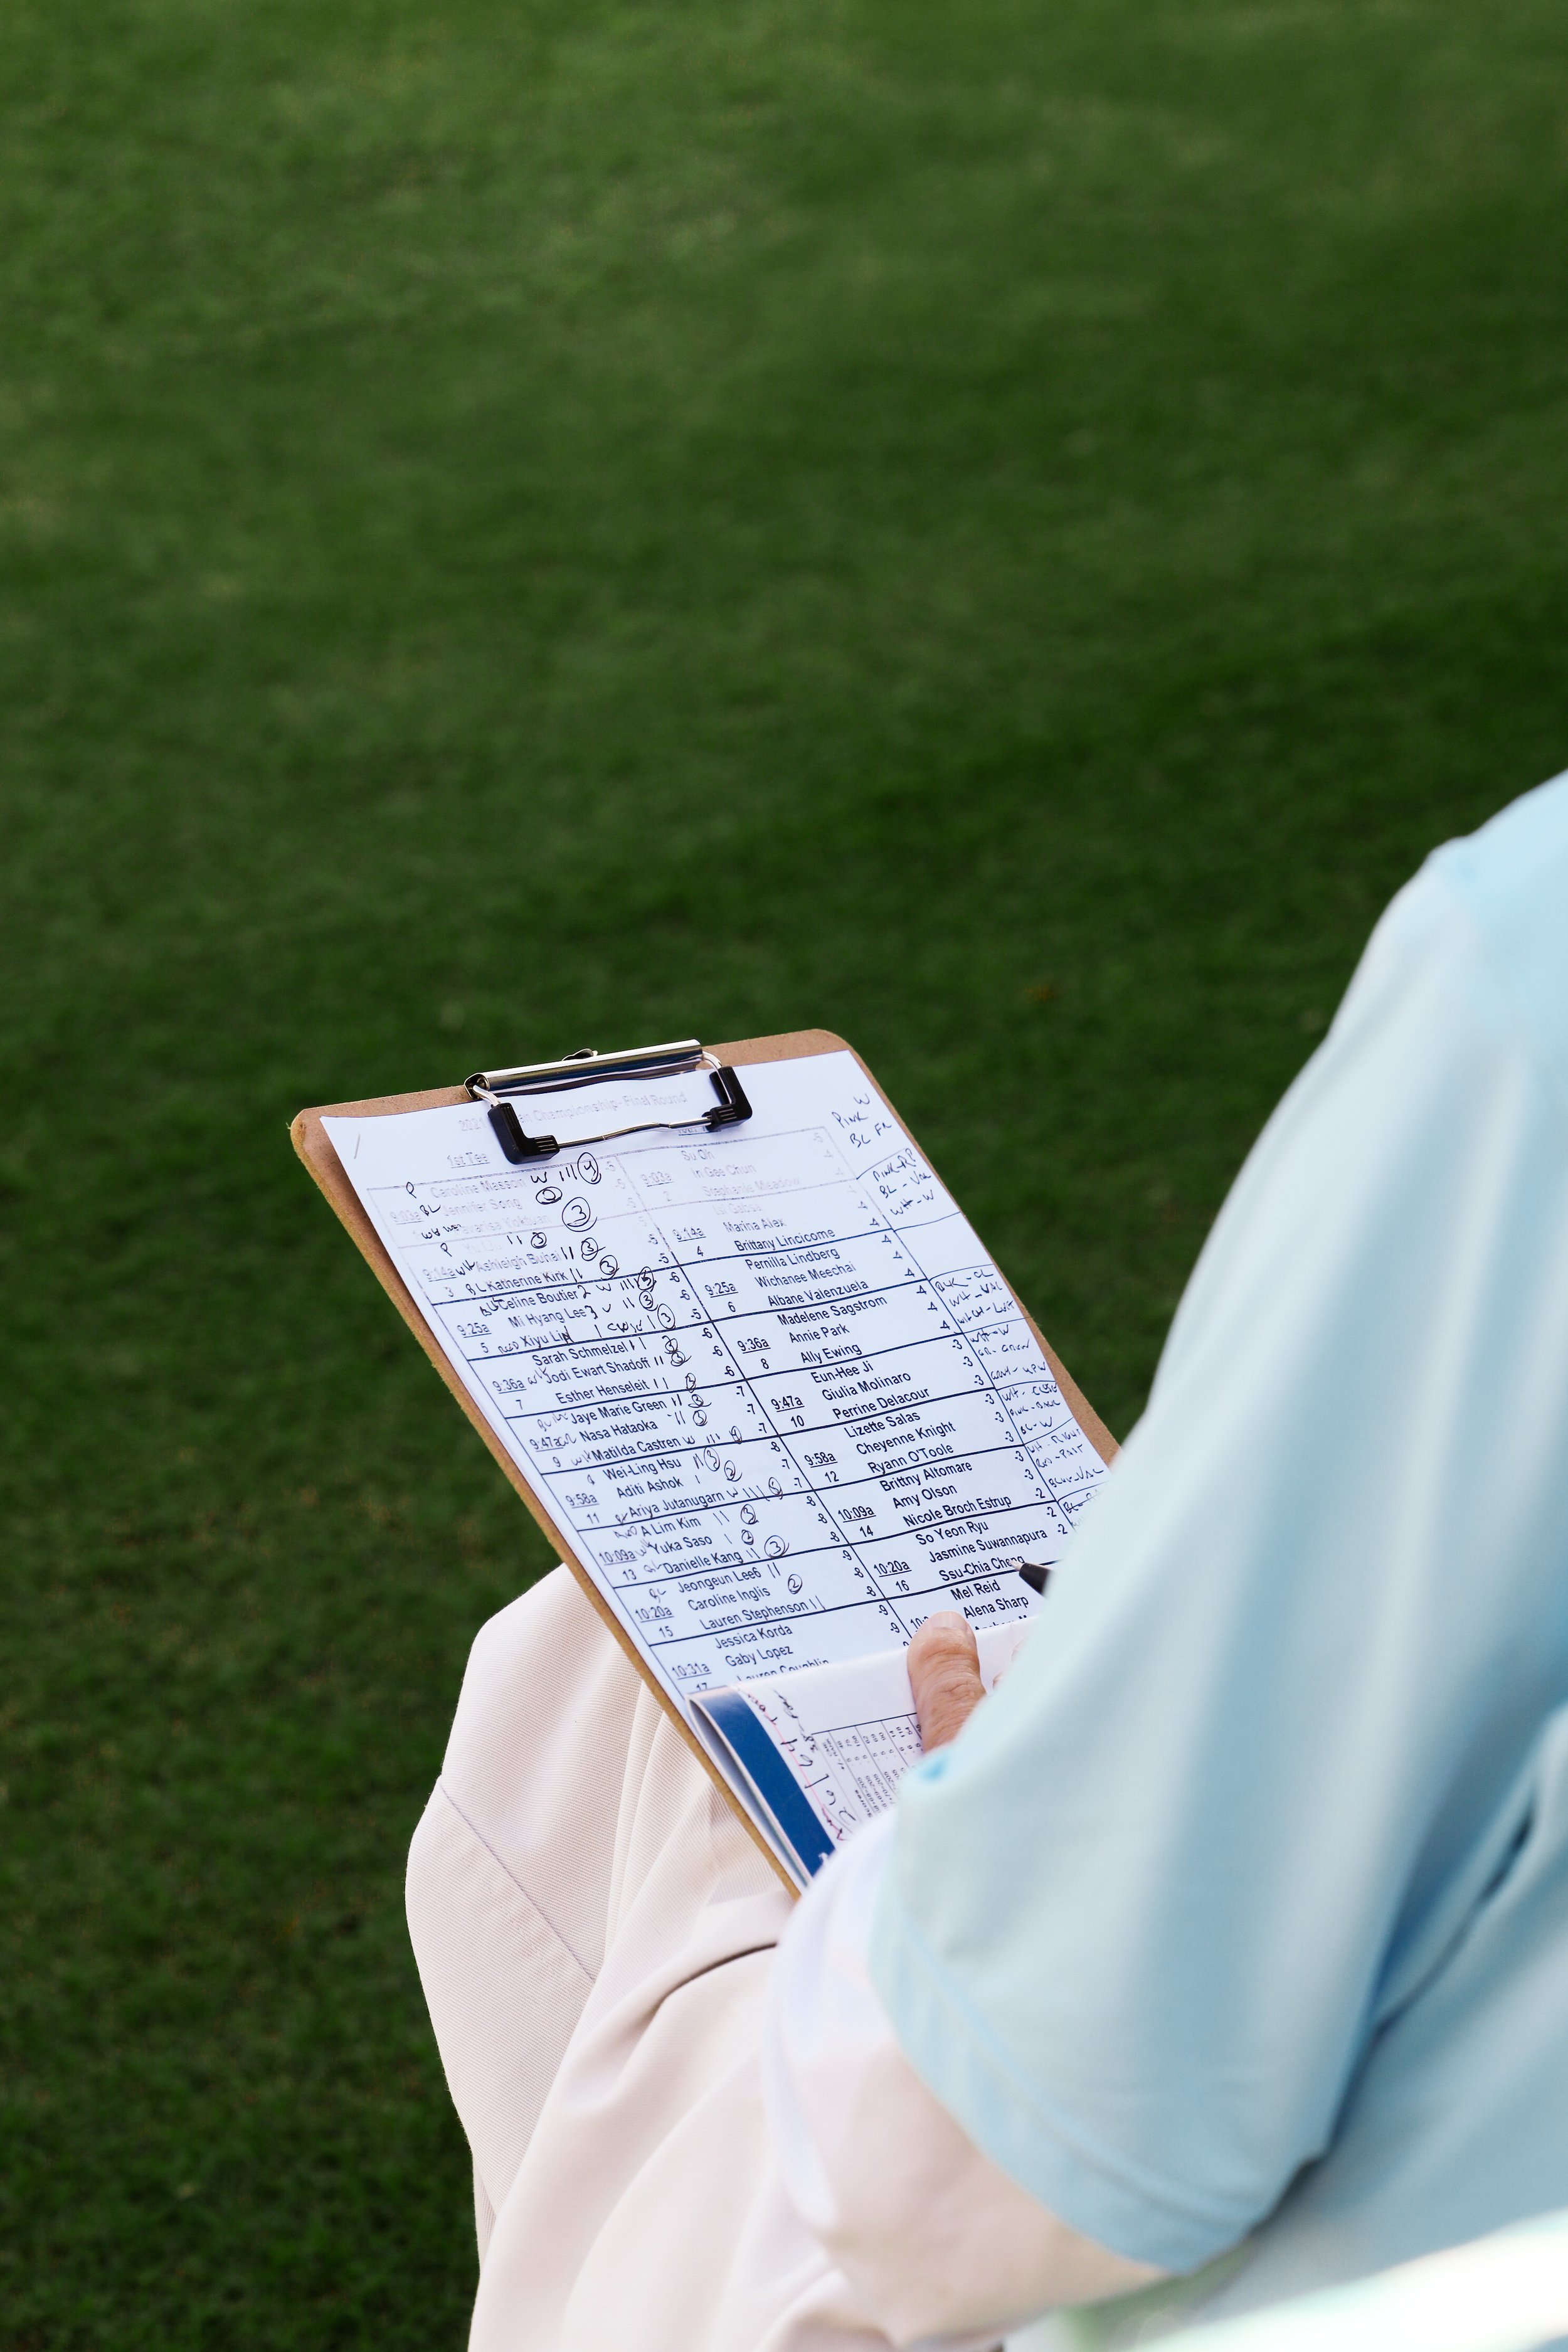  Person holding clipboard of score and athlete lineup for golf tournament. 